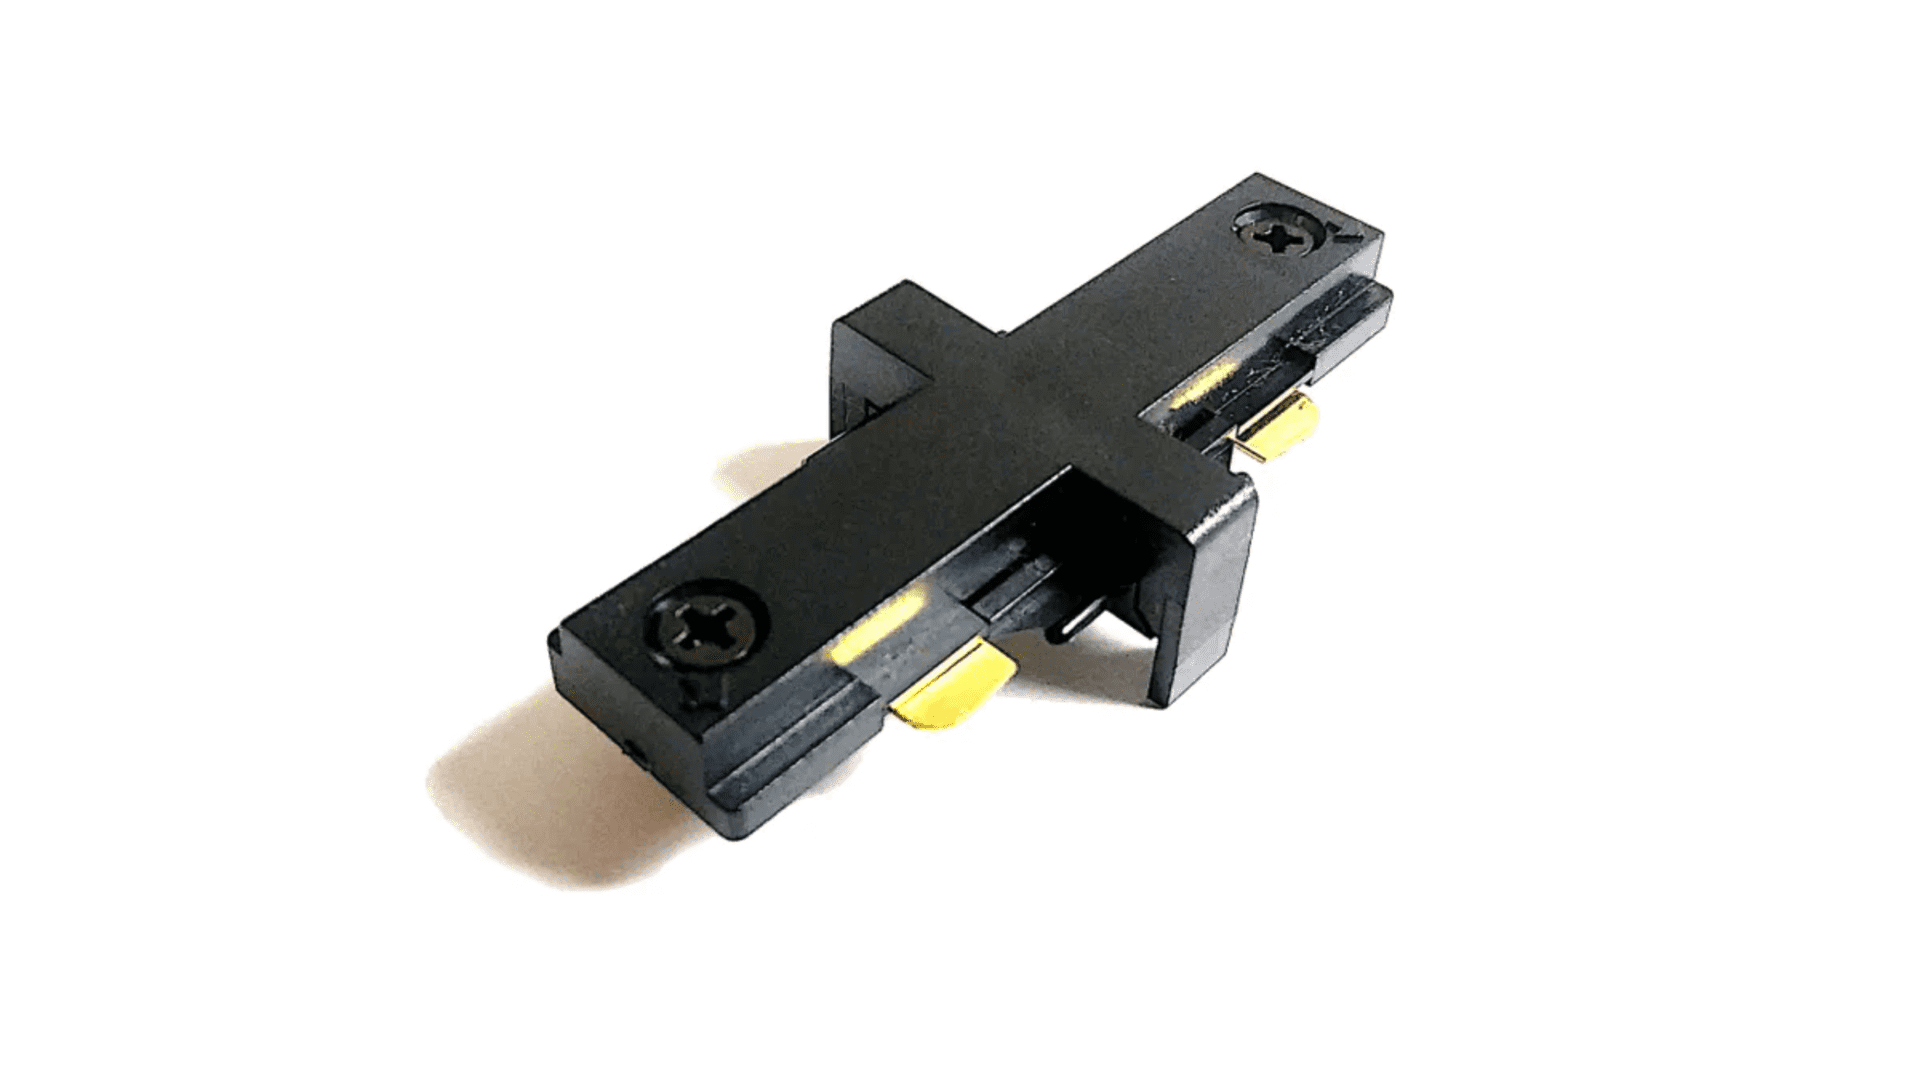 Black Juno R23 Miniature Straight Connector (R-Type Tracks) with metallic terminals and a roller lever, isolated on a white background.